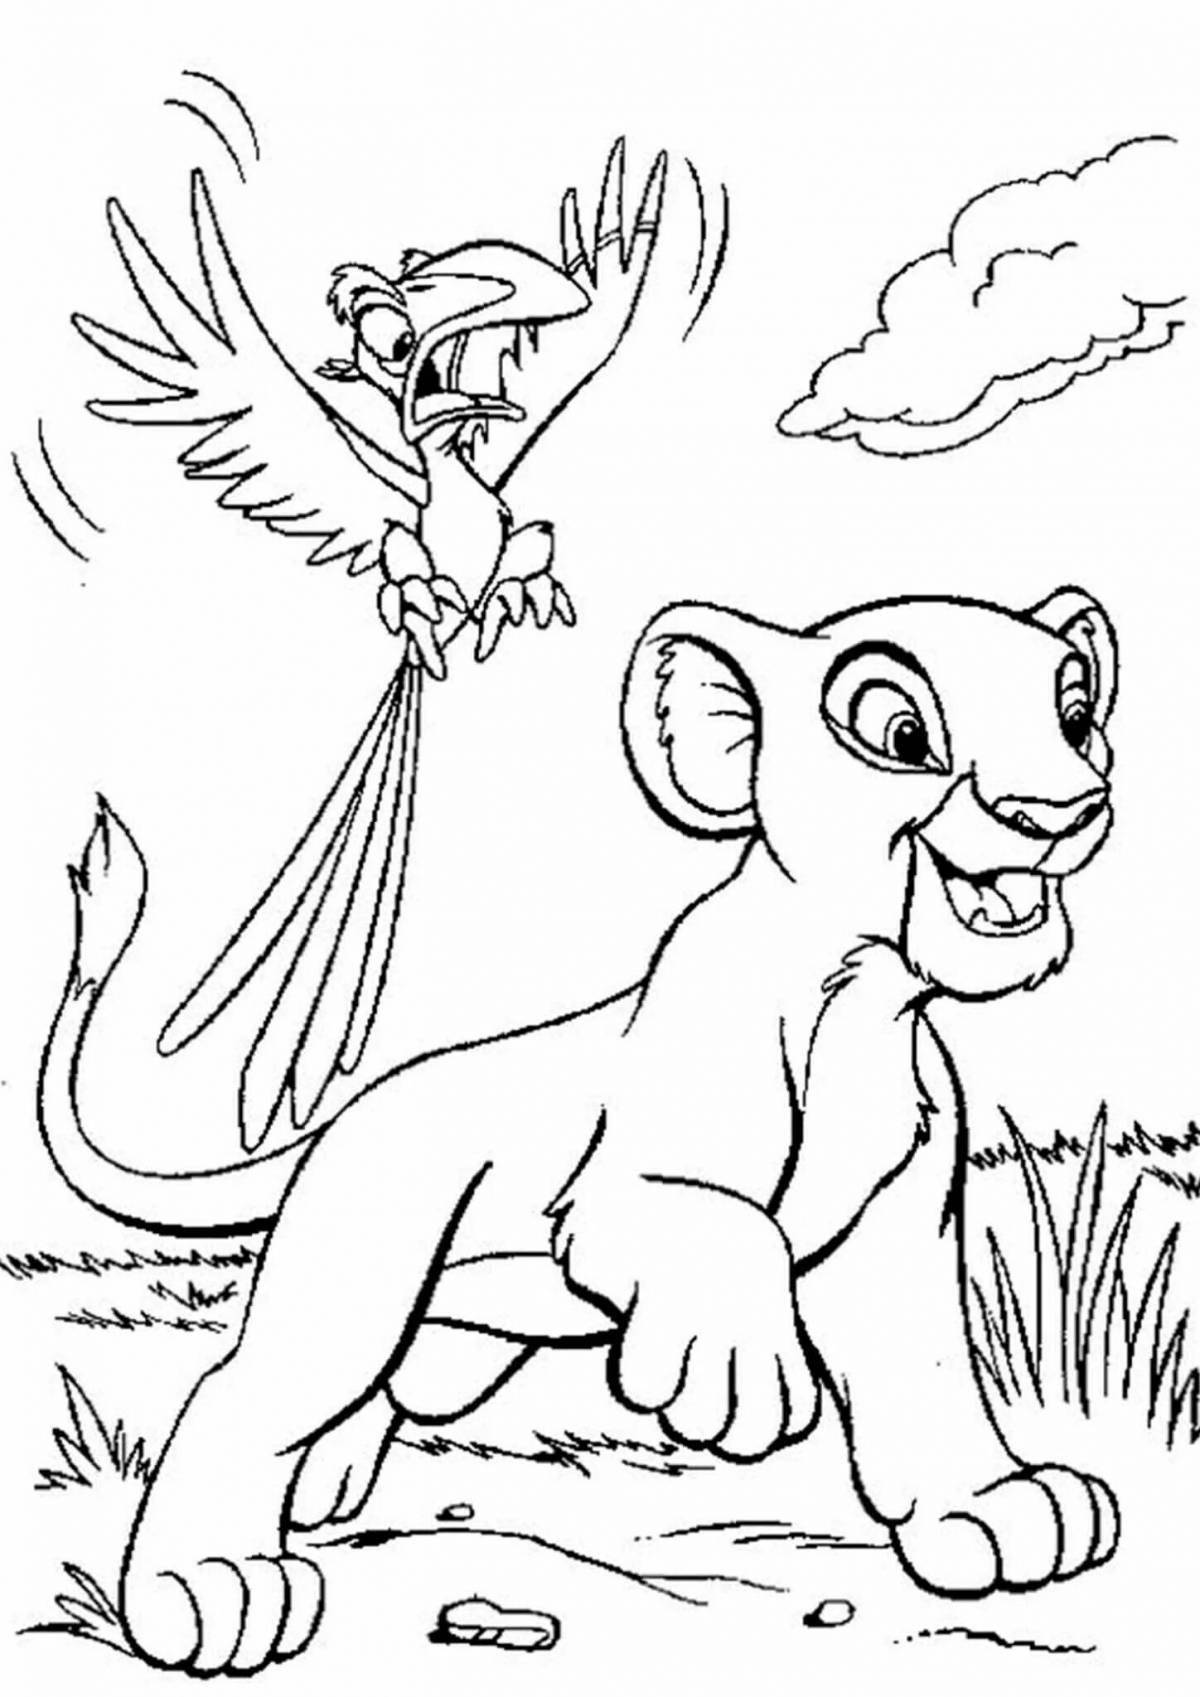 Simba awesome coloring page